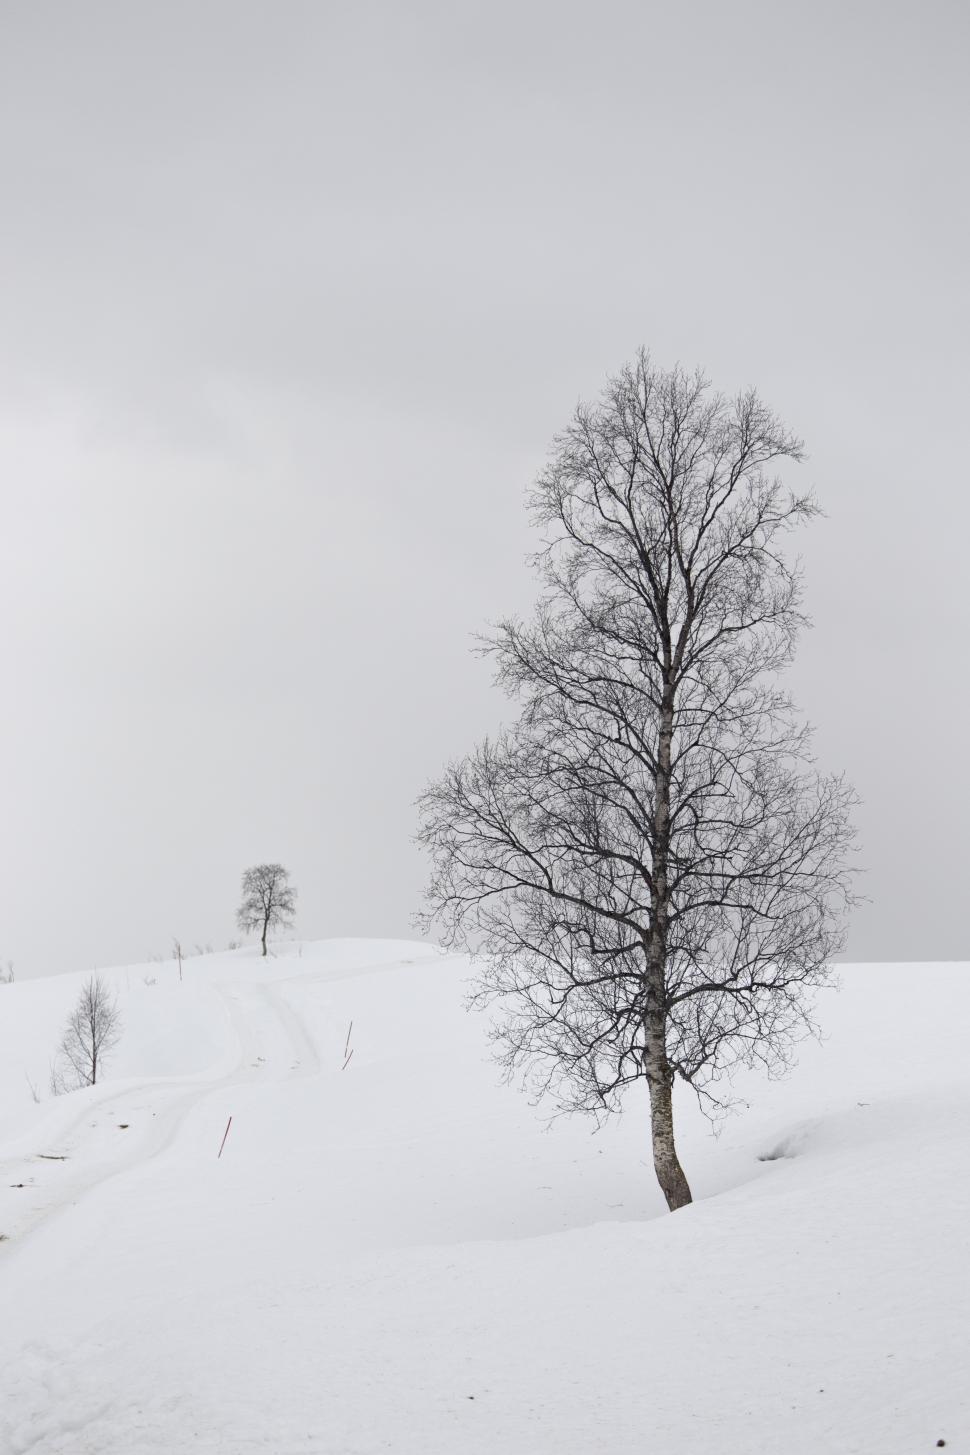 Free Image of A tree in a snowy landscape 